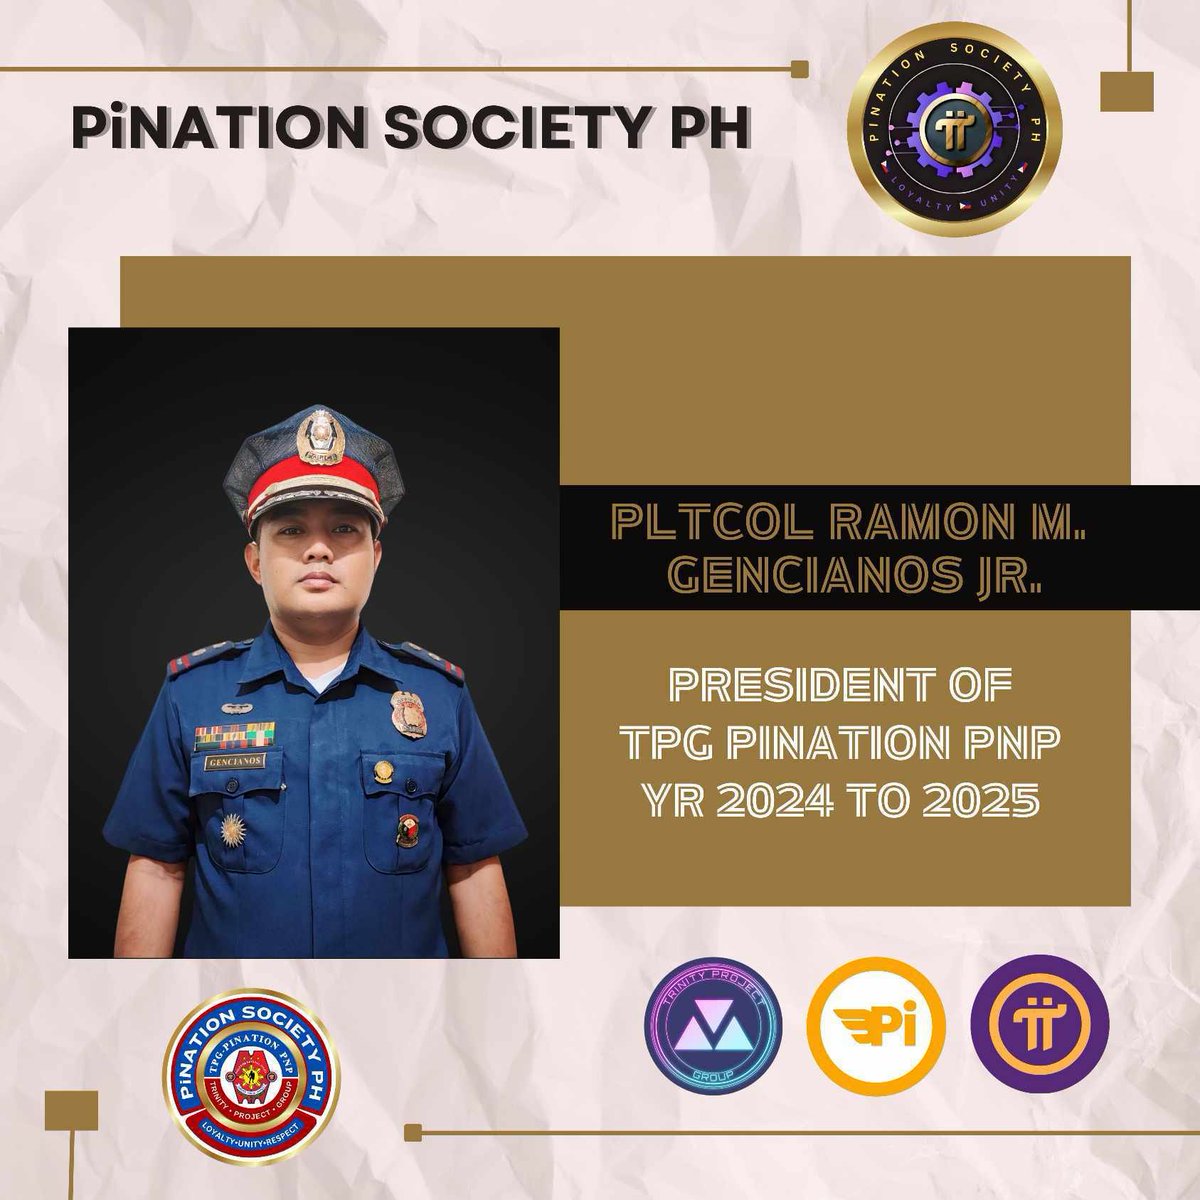 Congratulations Bro!✨

PLTCOL RAMON M. GENCIANOS JR.

A PNPA Alumni, Crypto Enthusiast, and a dedicated supporter of the TPG Ecosystem for the past 3 years. Serving as a Senior Pi Pioneer, and appointed as the President for TPG PiNation PNP, Year 2024 to 2025.

===
📢Telegram:…